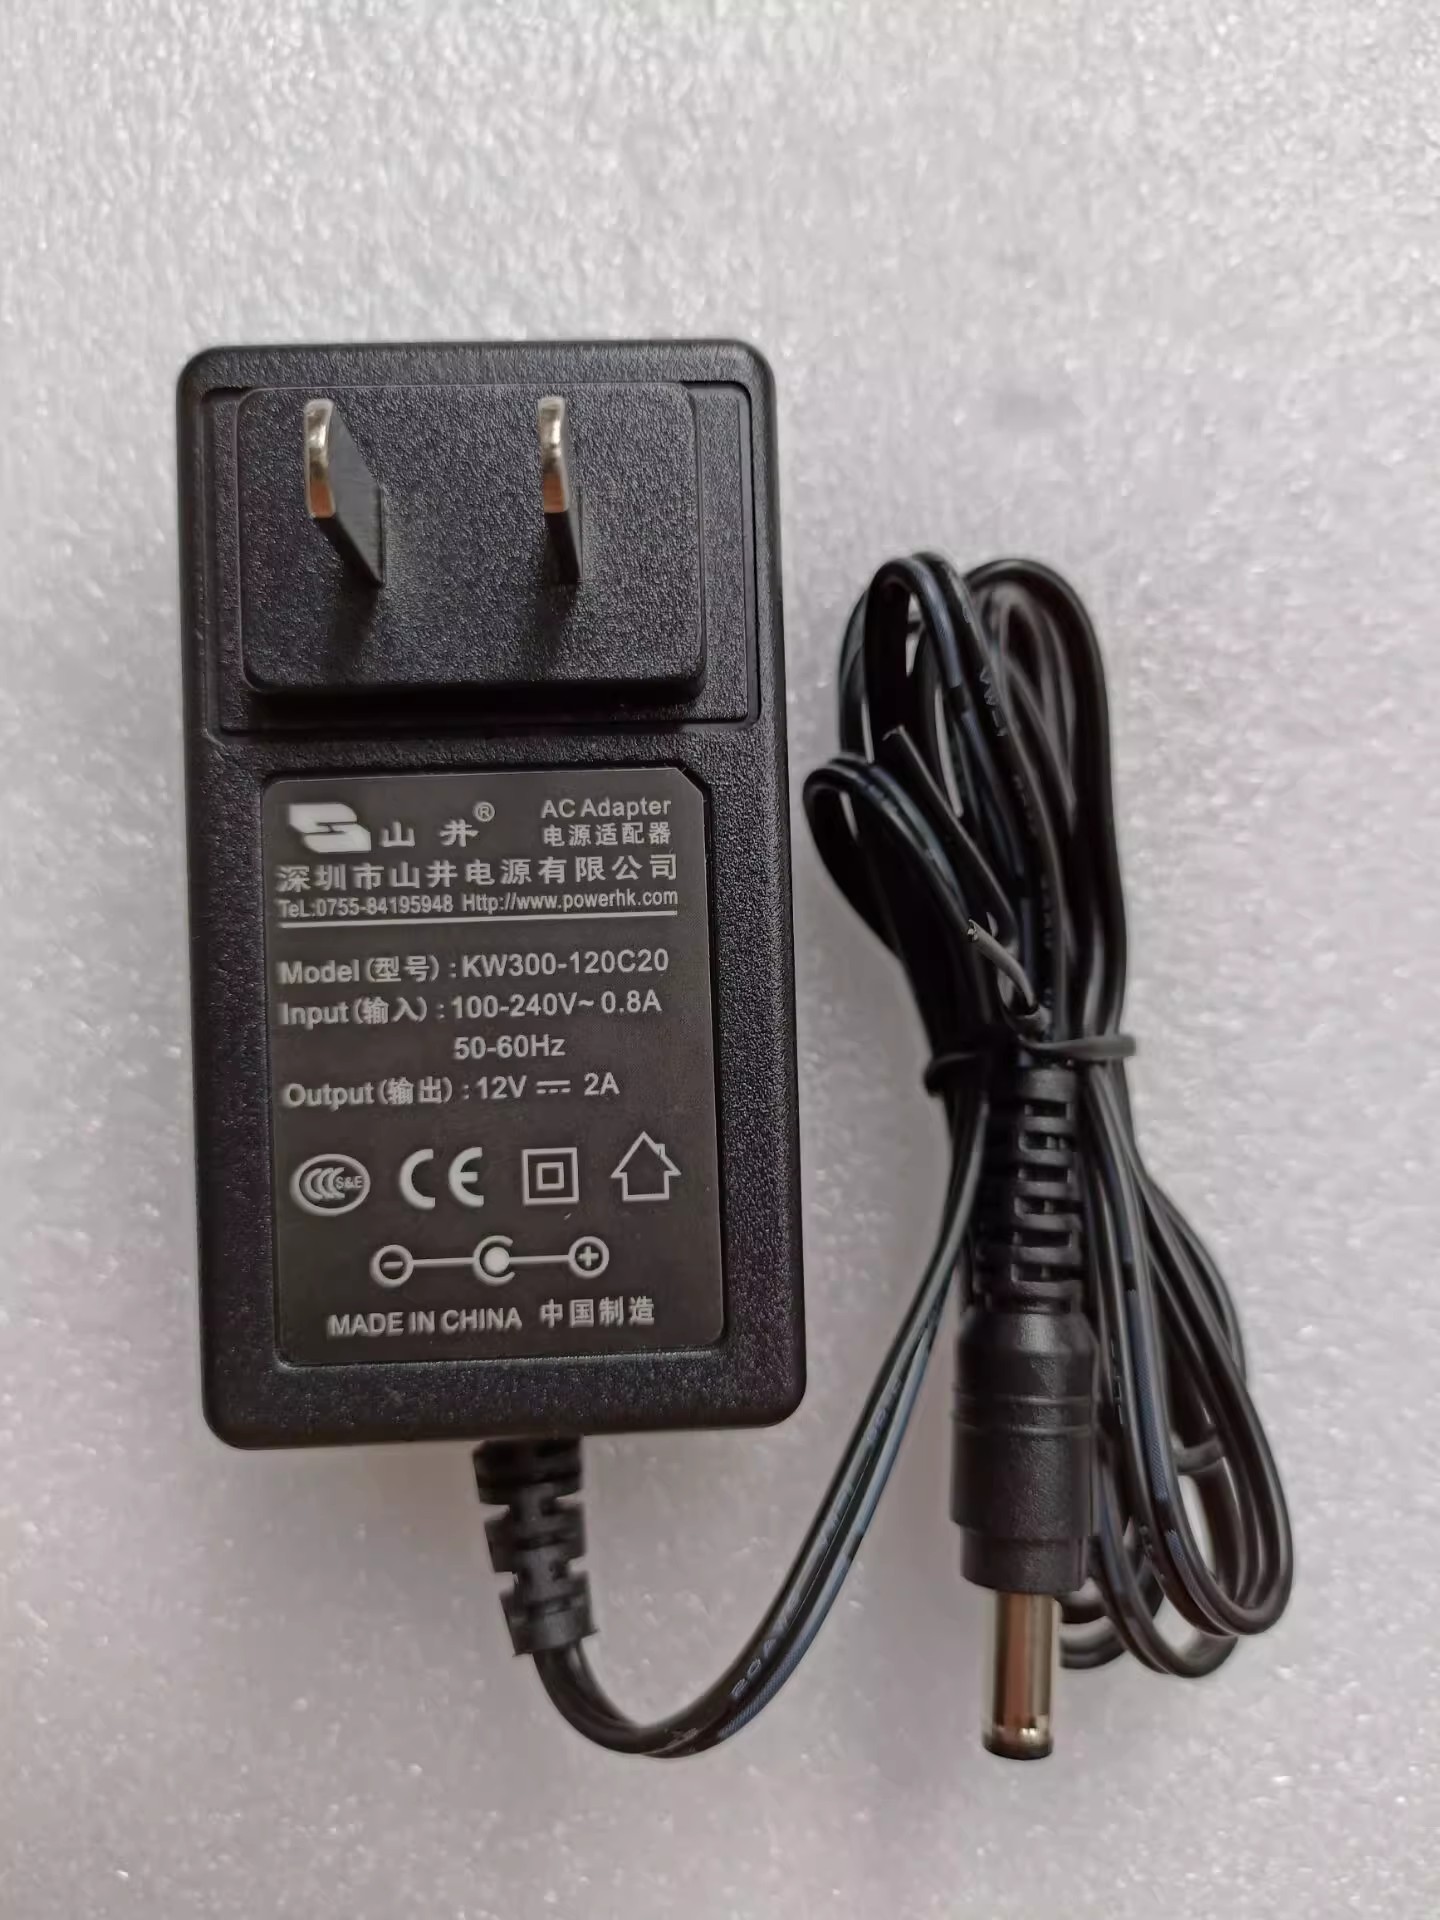 *Brand NEW* 12V 2A AC DC ADAPTHE KW300-120C20 POWER Supply